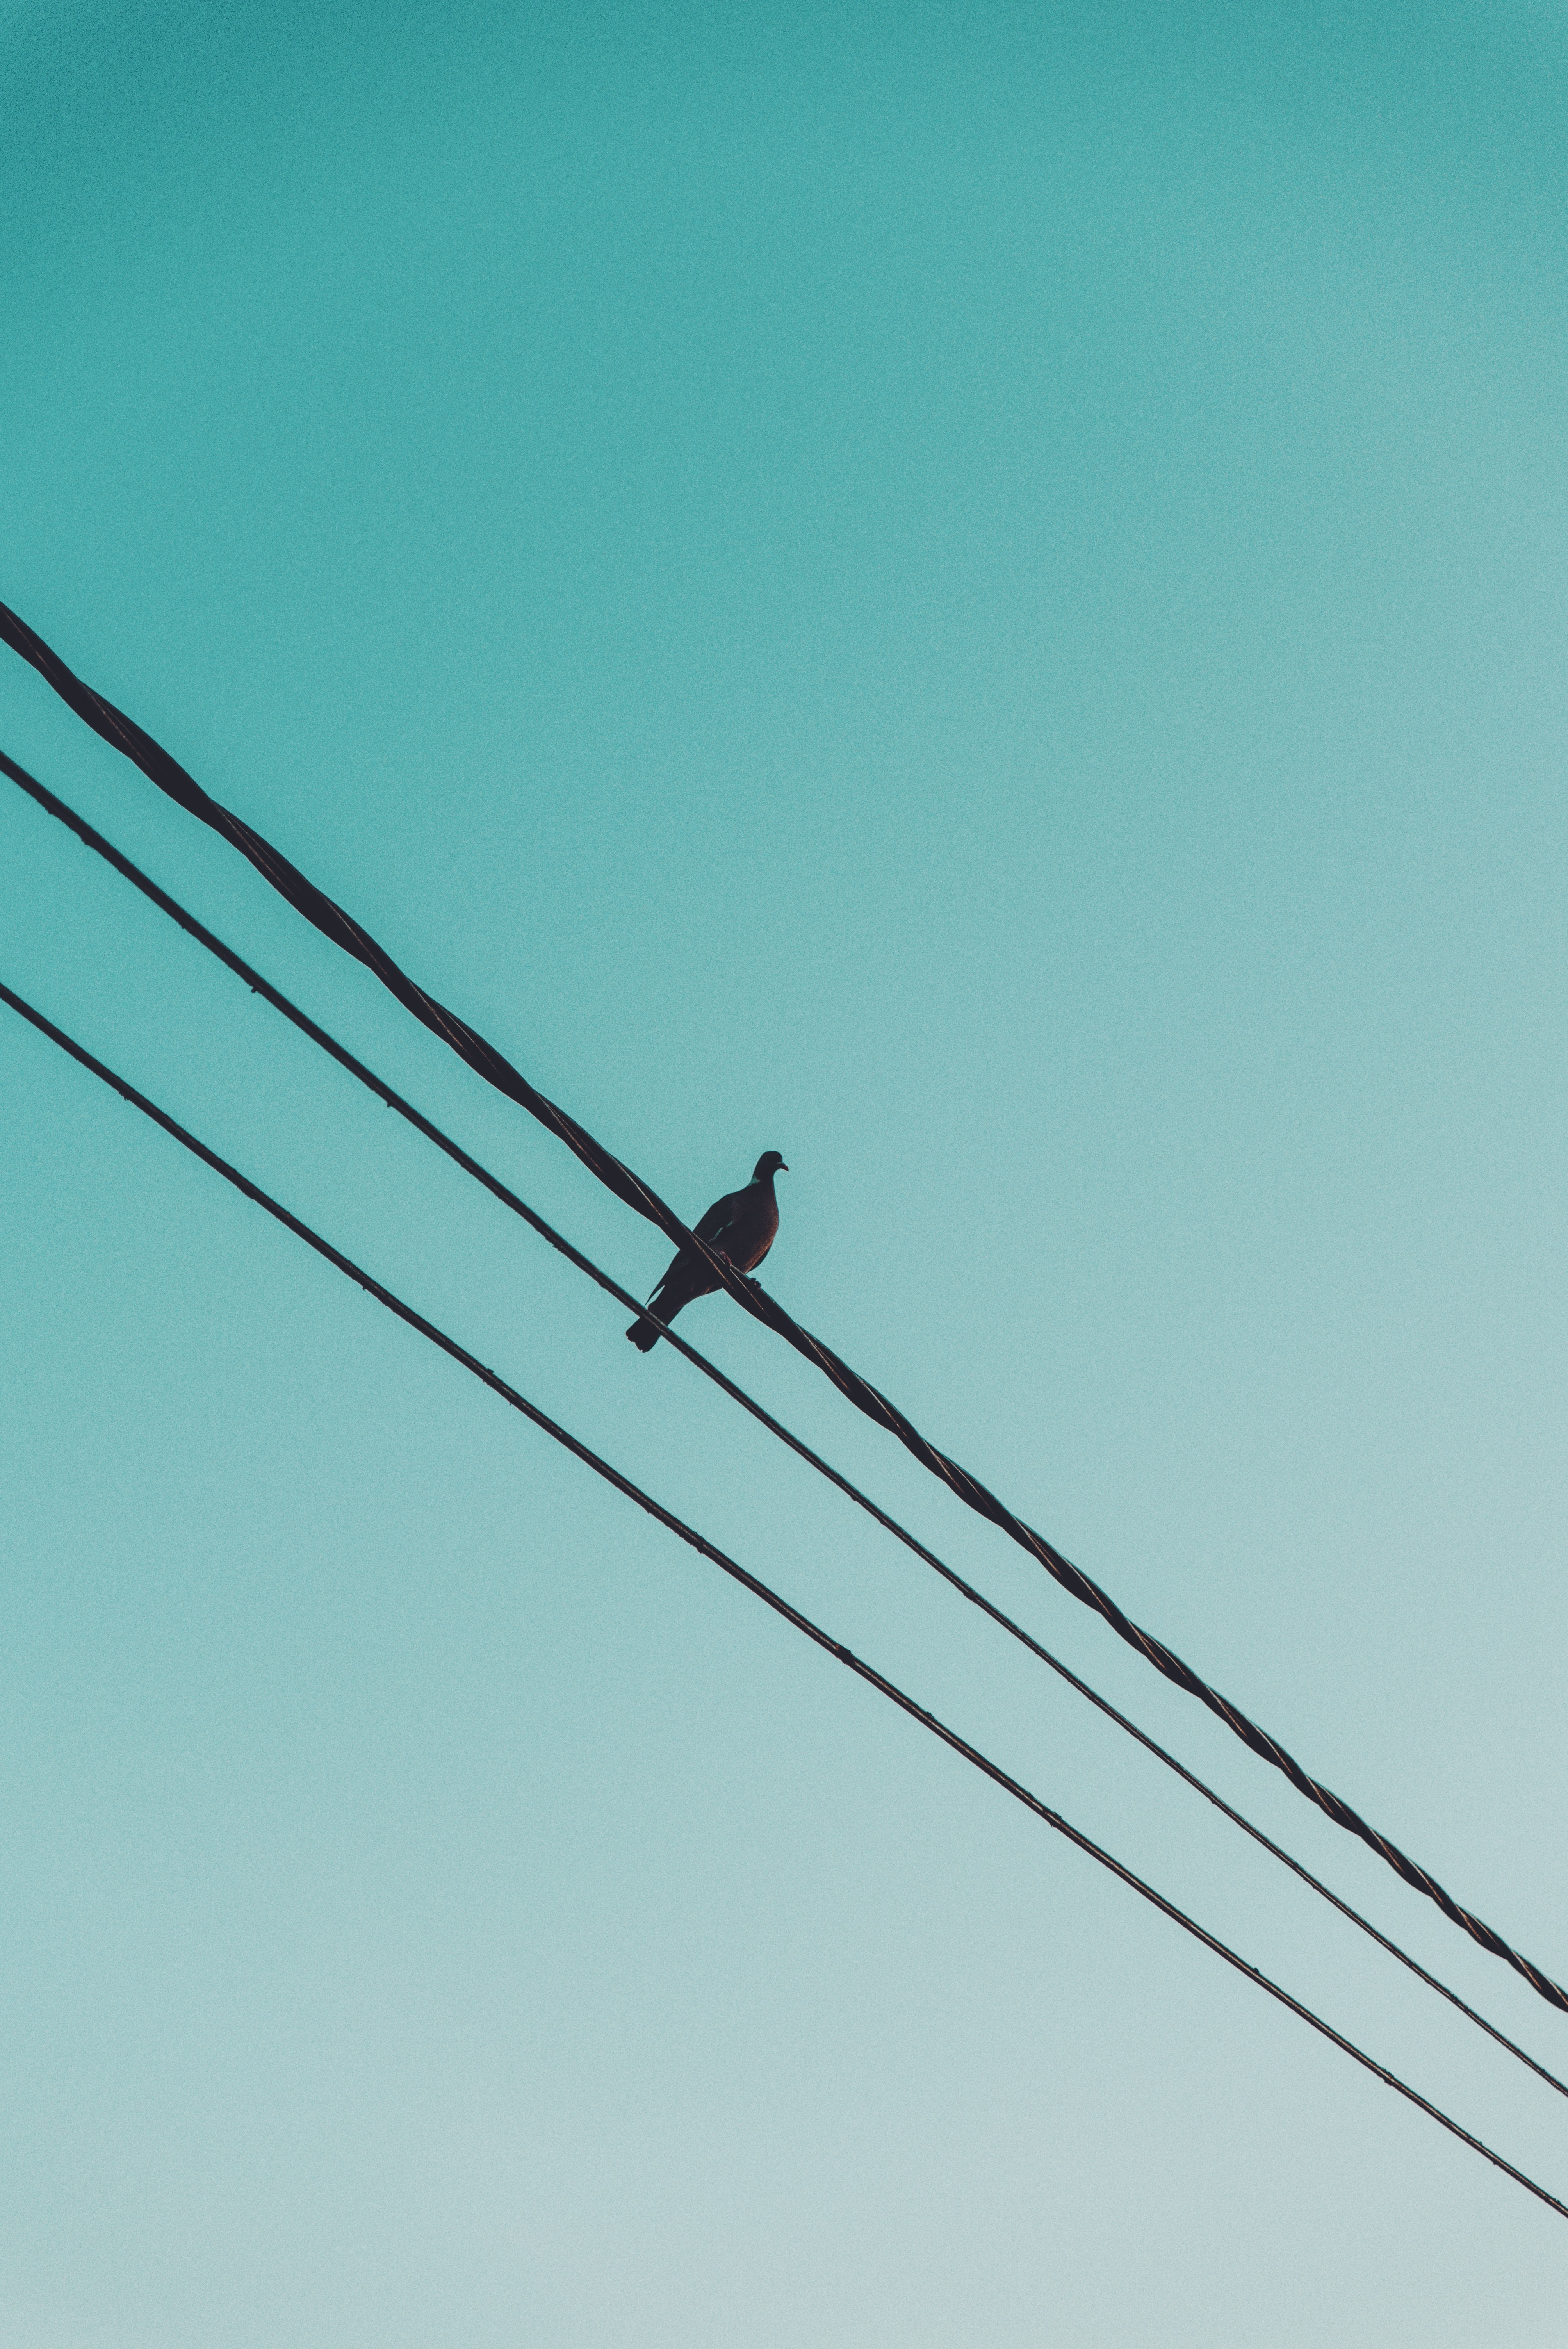 wires, dove, animals, sky, wire cellphone